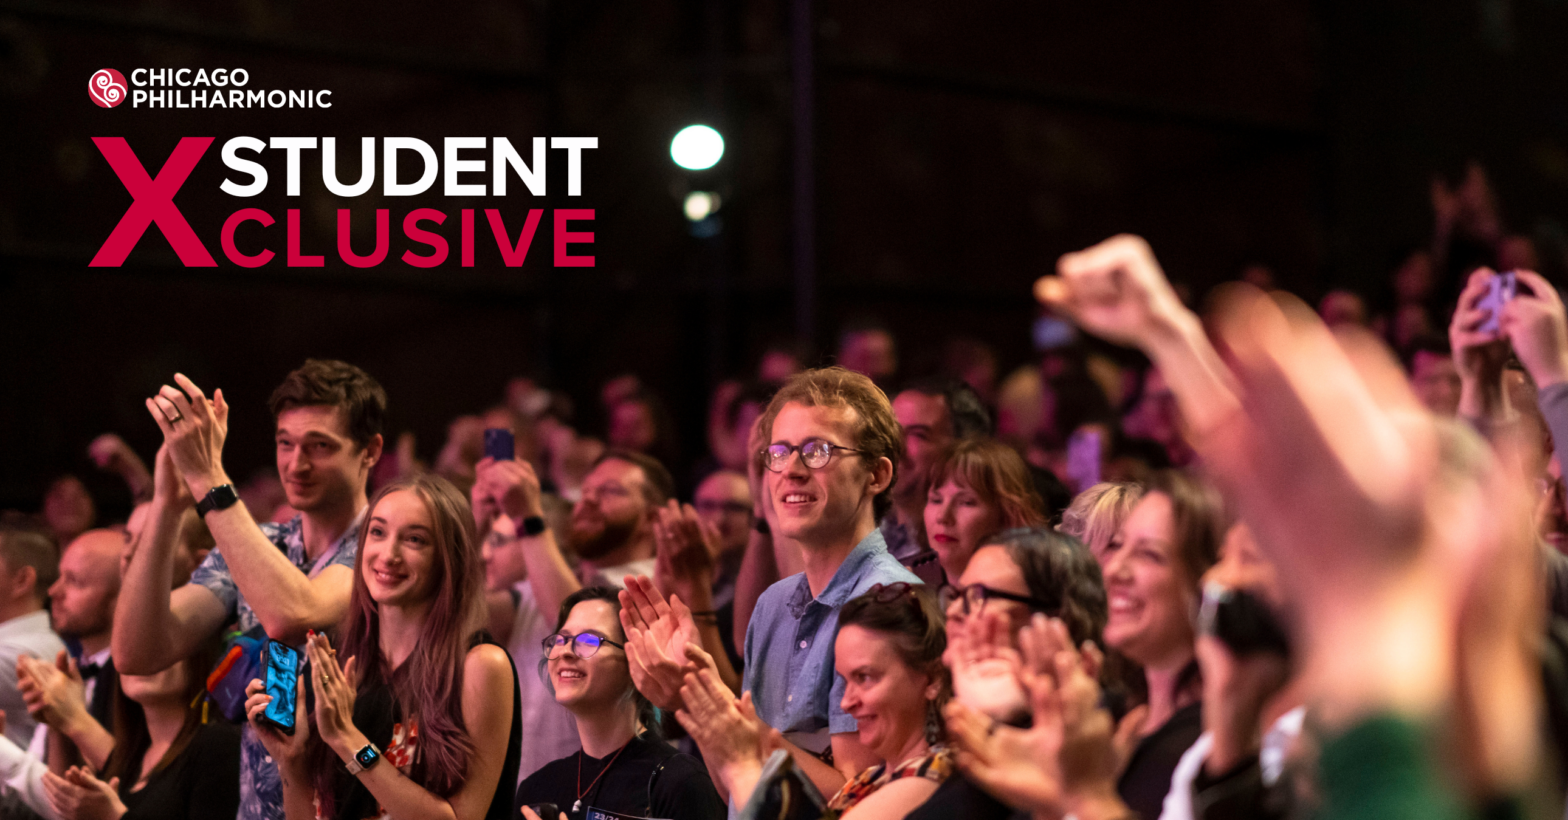 Featured image for post: Introducing STUDENT XCLUSIVE